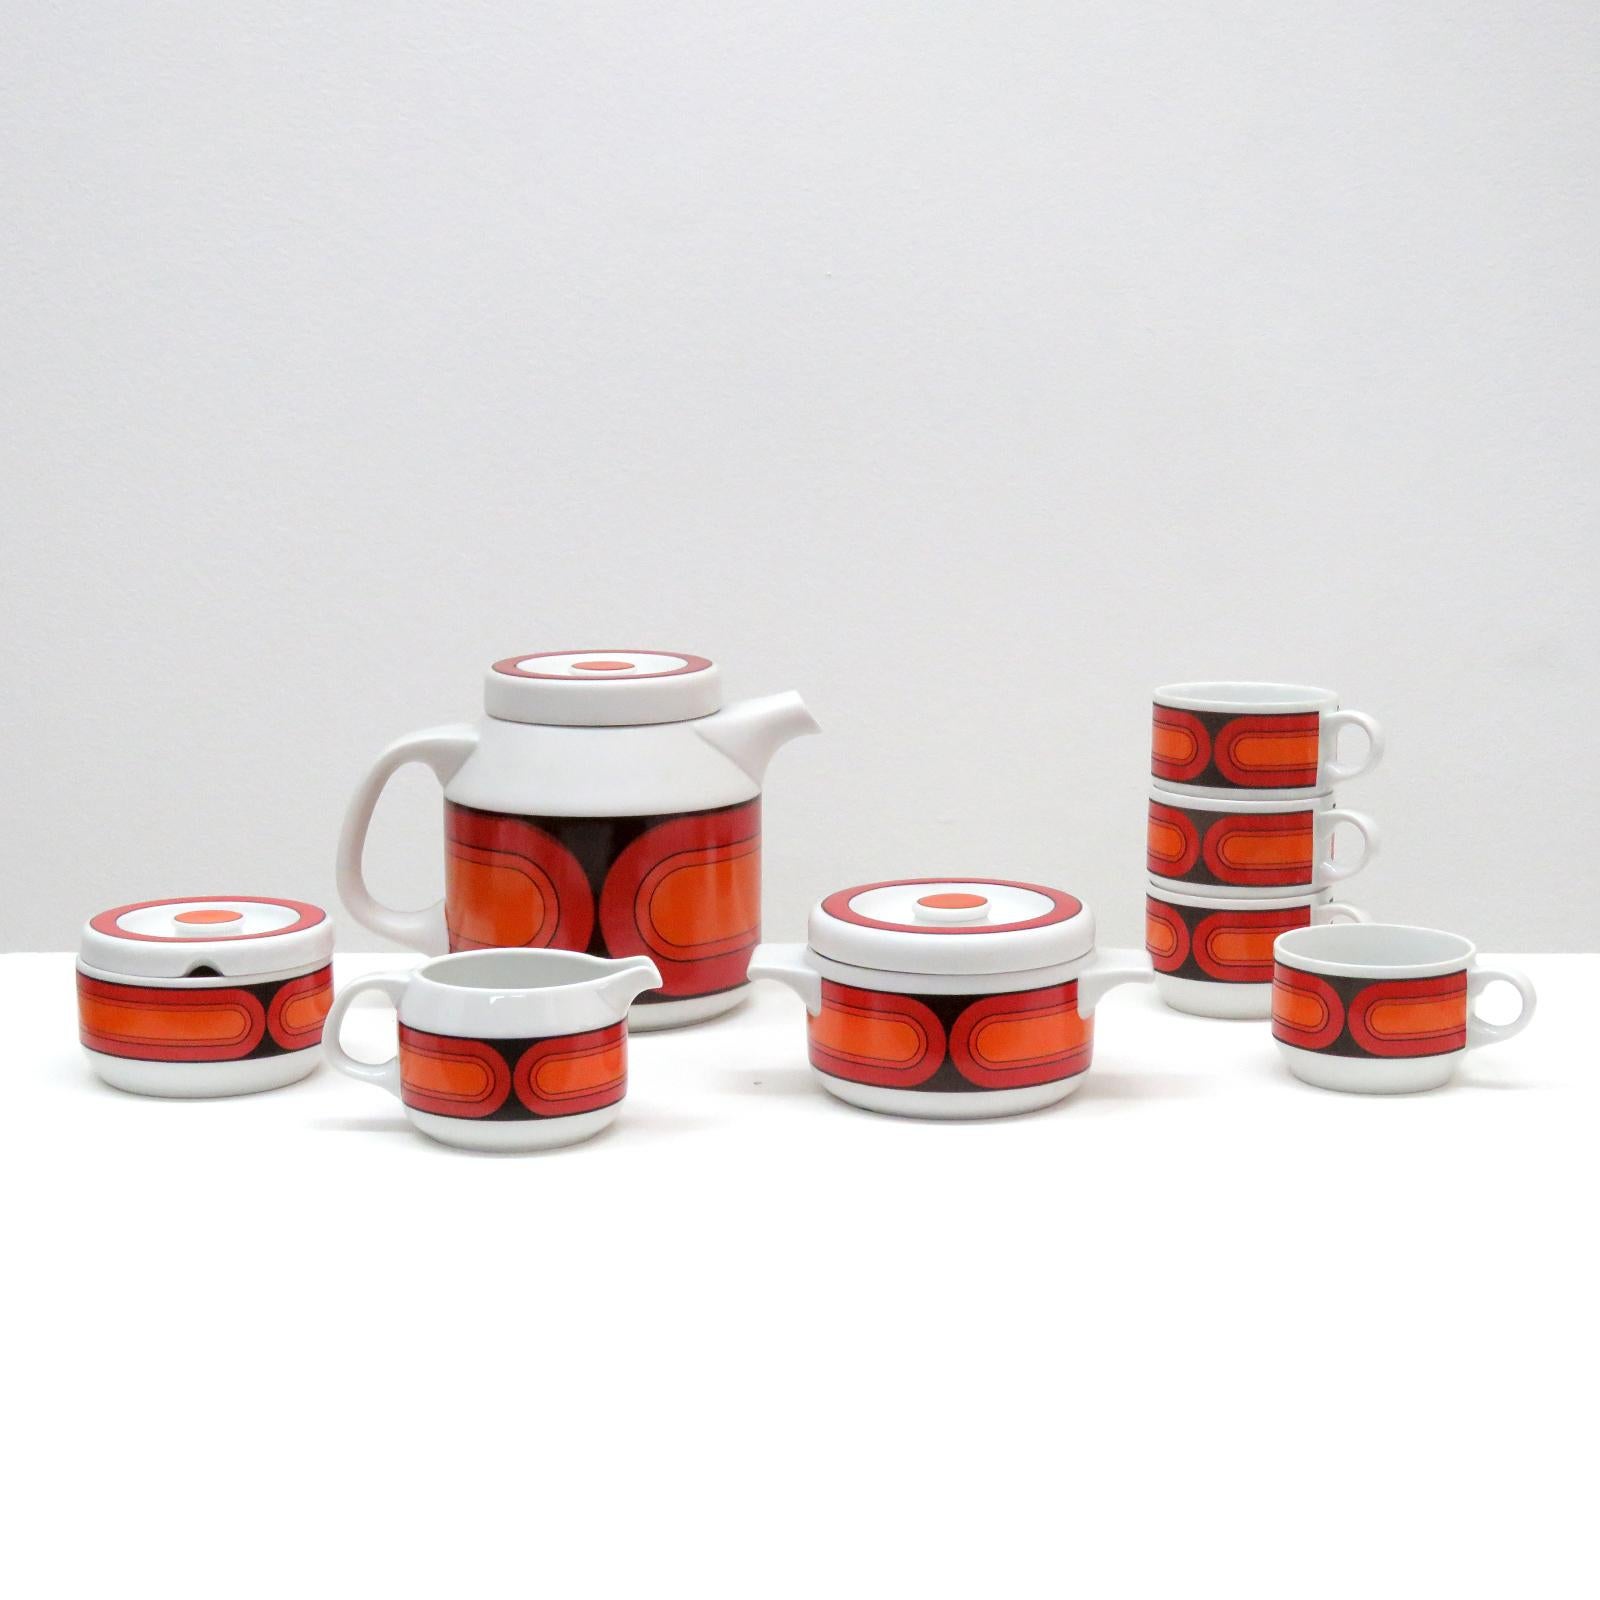 Stunning 11-piece porcelain tea/coffee set 'Sicilia' form 3000 ceramic set by Hans Theo Baumann for Arzberg Porzellan, Germany. The set contains a tea/coffee pot with lid, a small casserole pot with lid (both fireproof), four cups, a milk vessel and